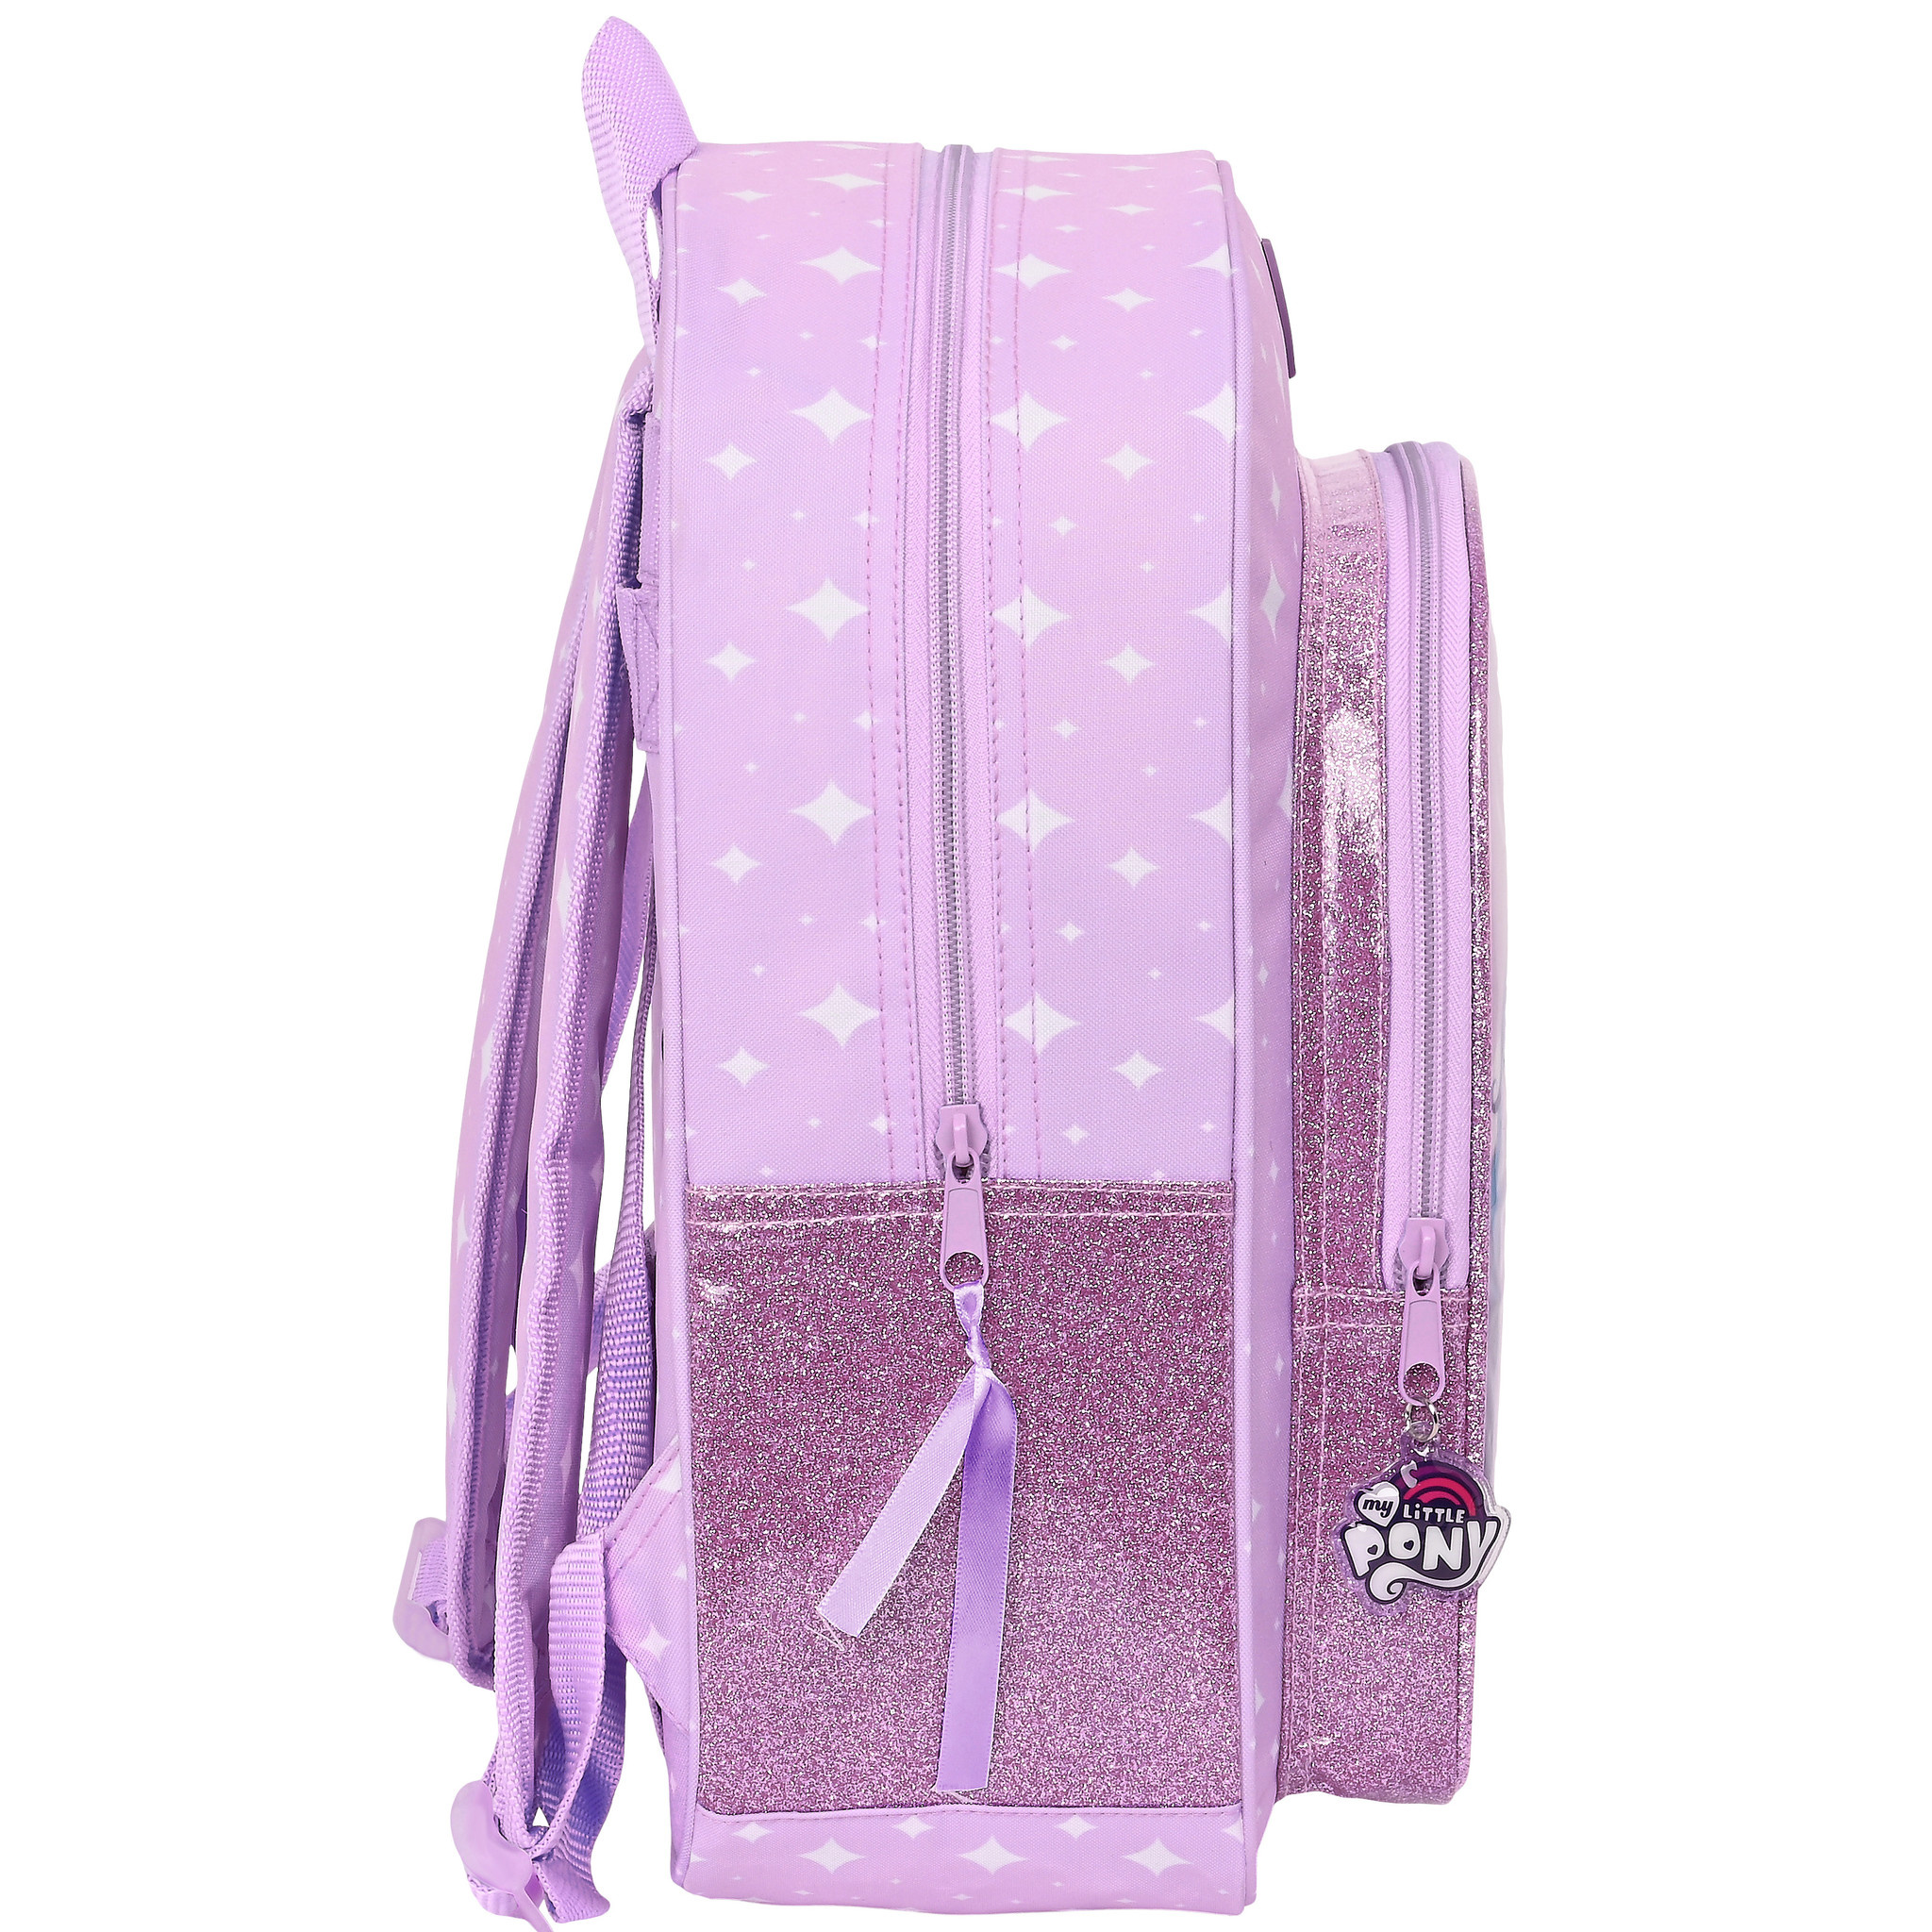 My little Pony Backpack, #love - 34 x 26 x 11 cm - Polyester